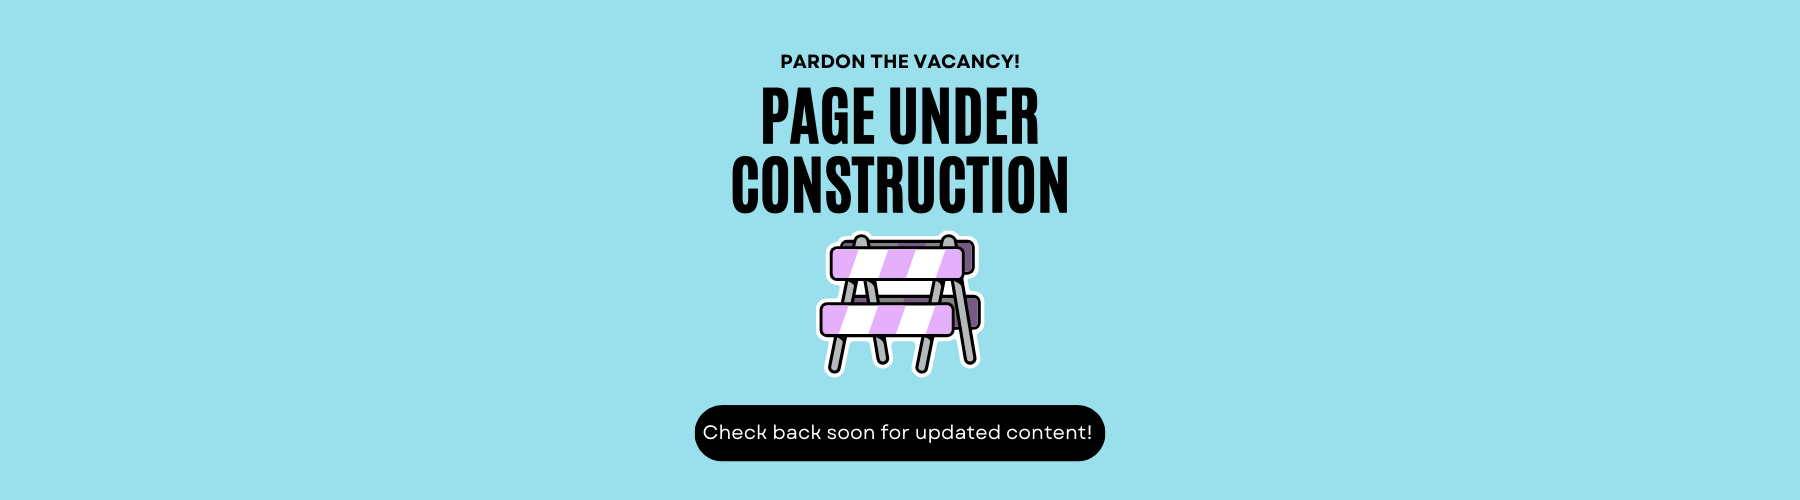 page under construction header image